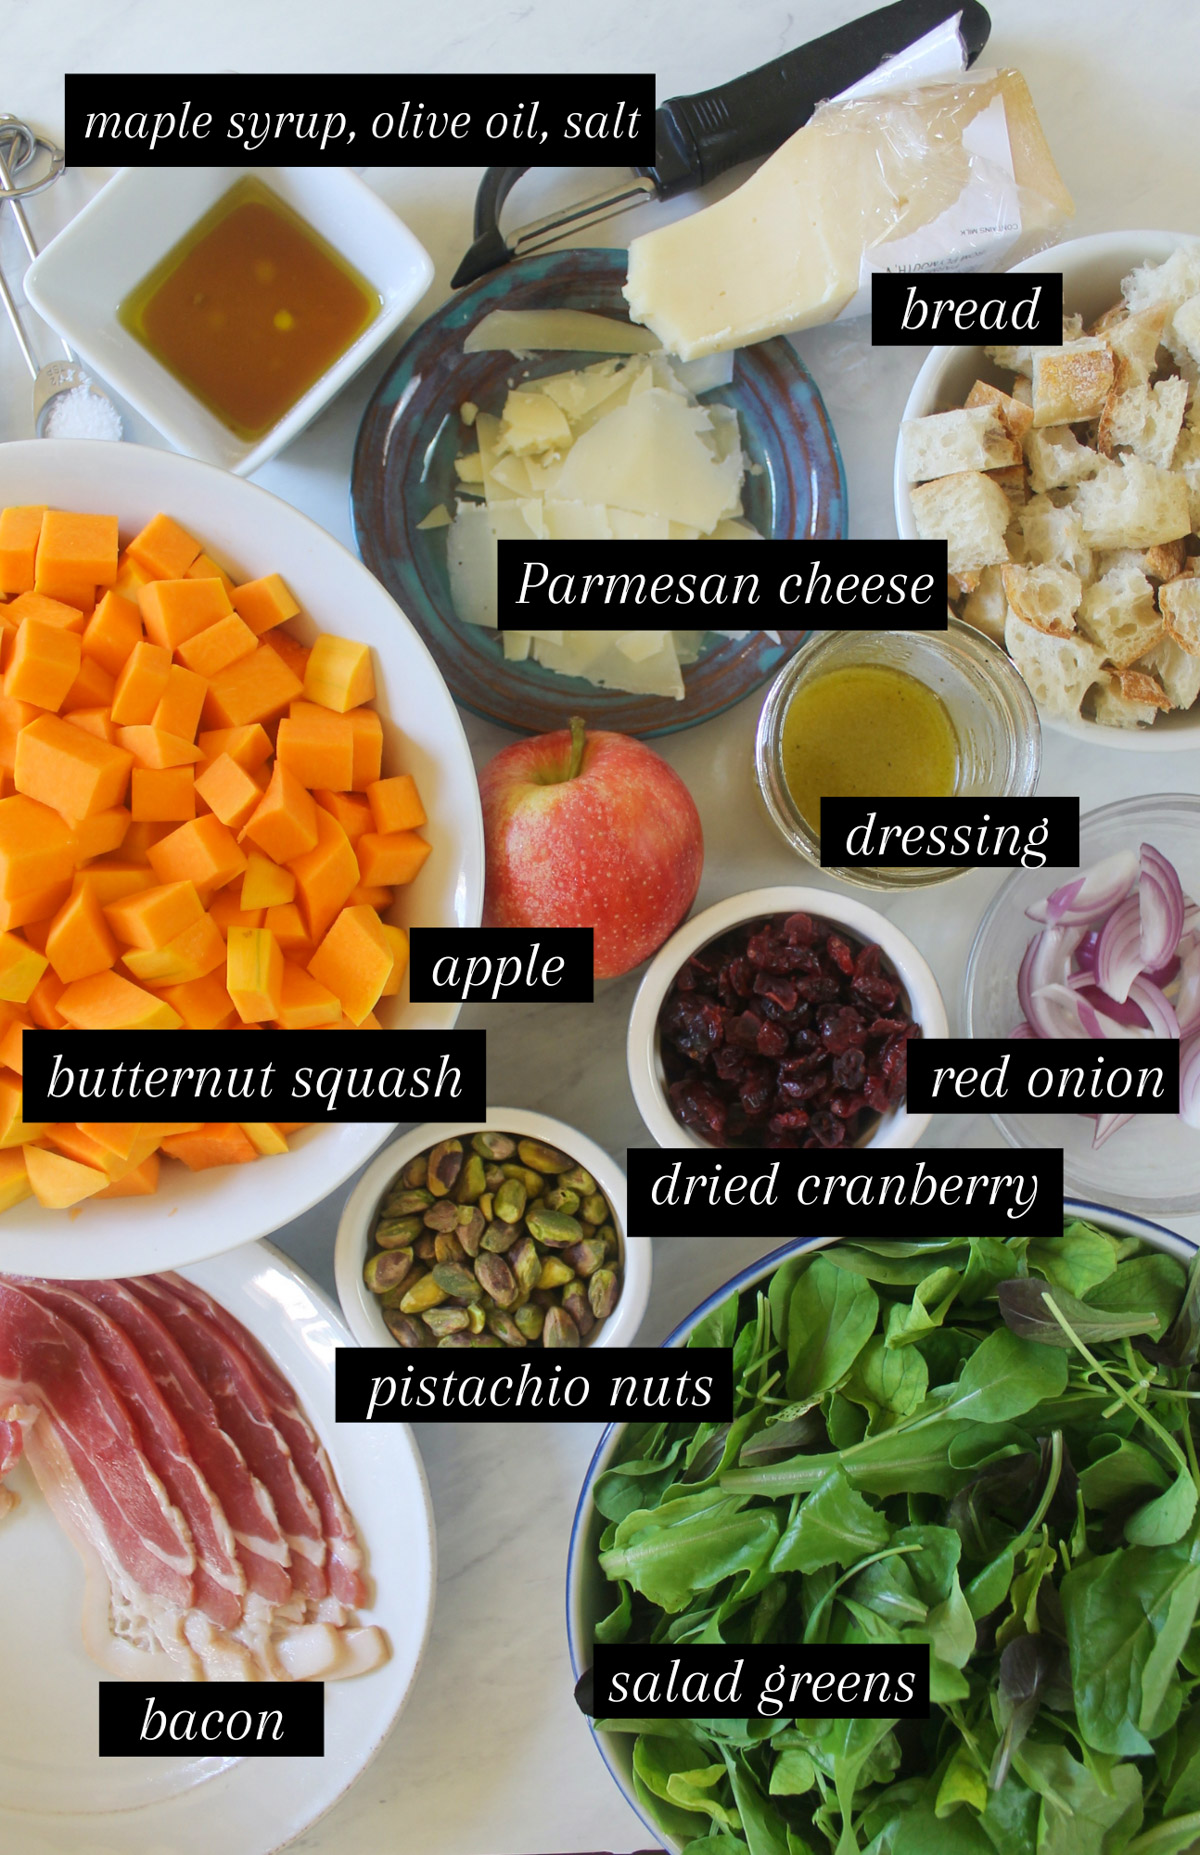 Ingredients for Maple Butternut Squash Fall Harvest Salad.